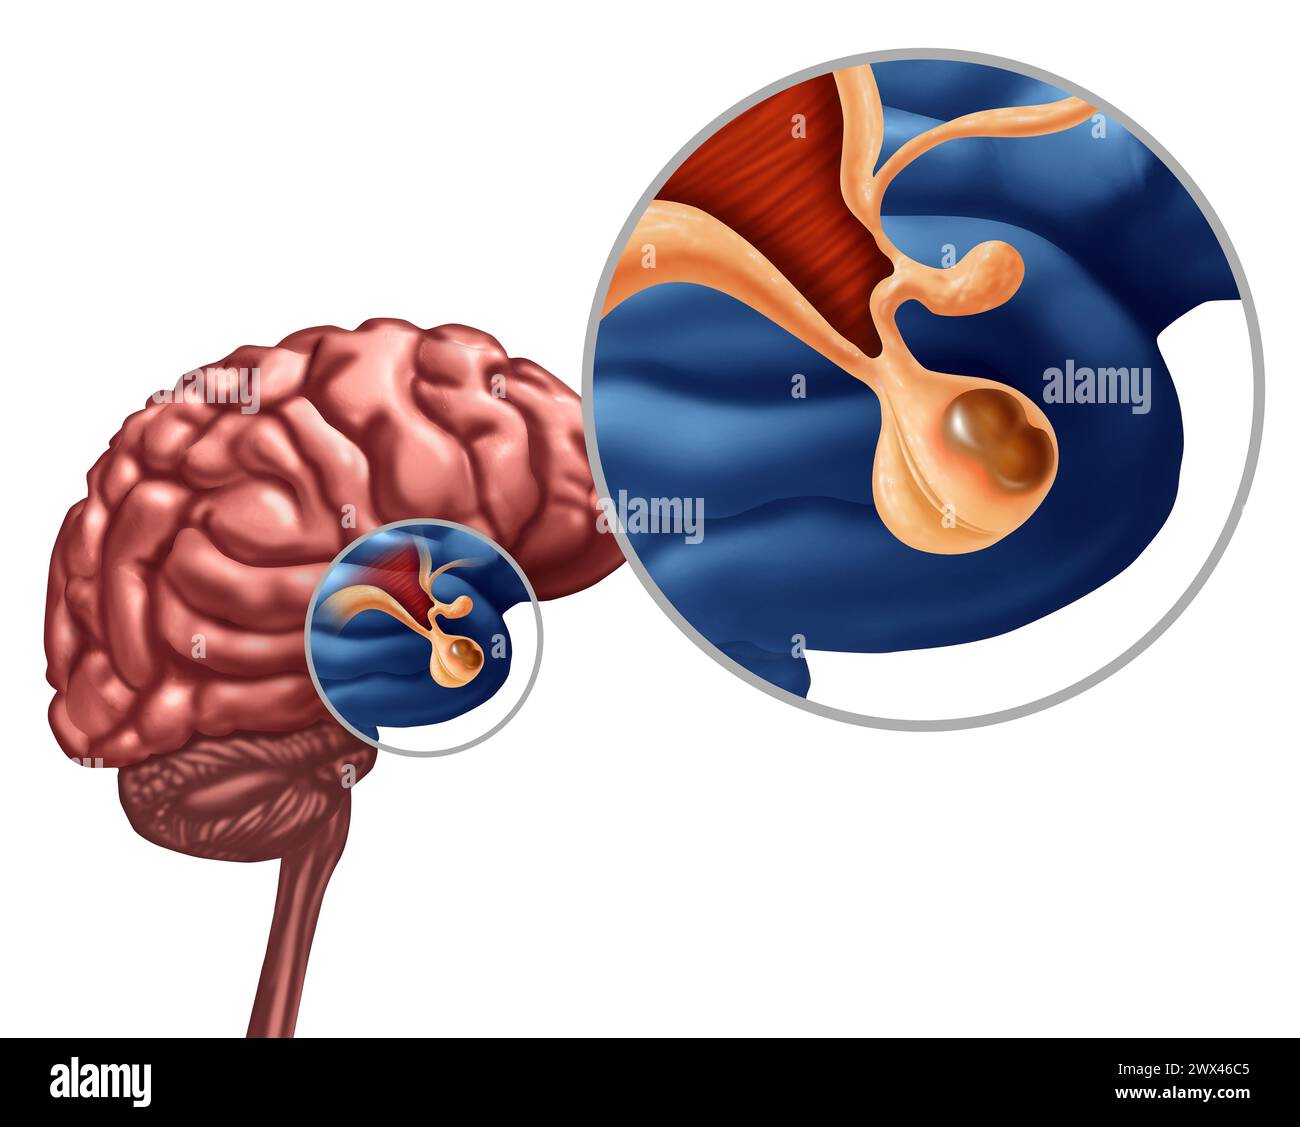 Pituitary Adenoma Benign Tumor as a noncancerous growth diagnosis on the Gland or Hypothalamus or hypophysis cerebri concept as part of the human anat Stock Photo